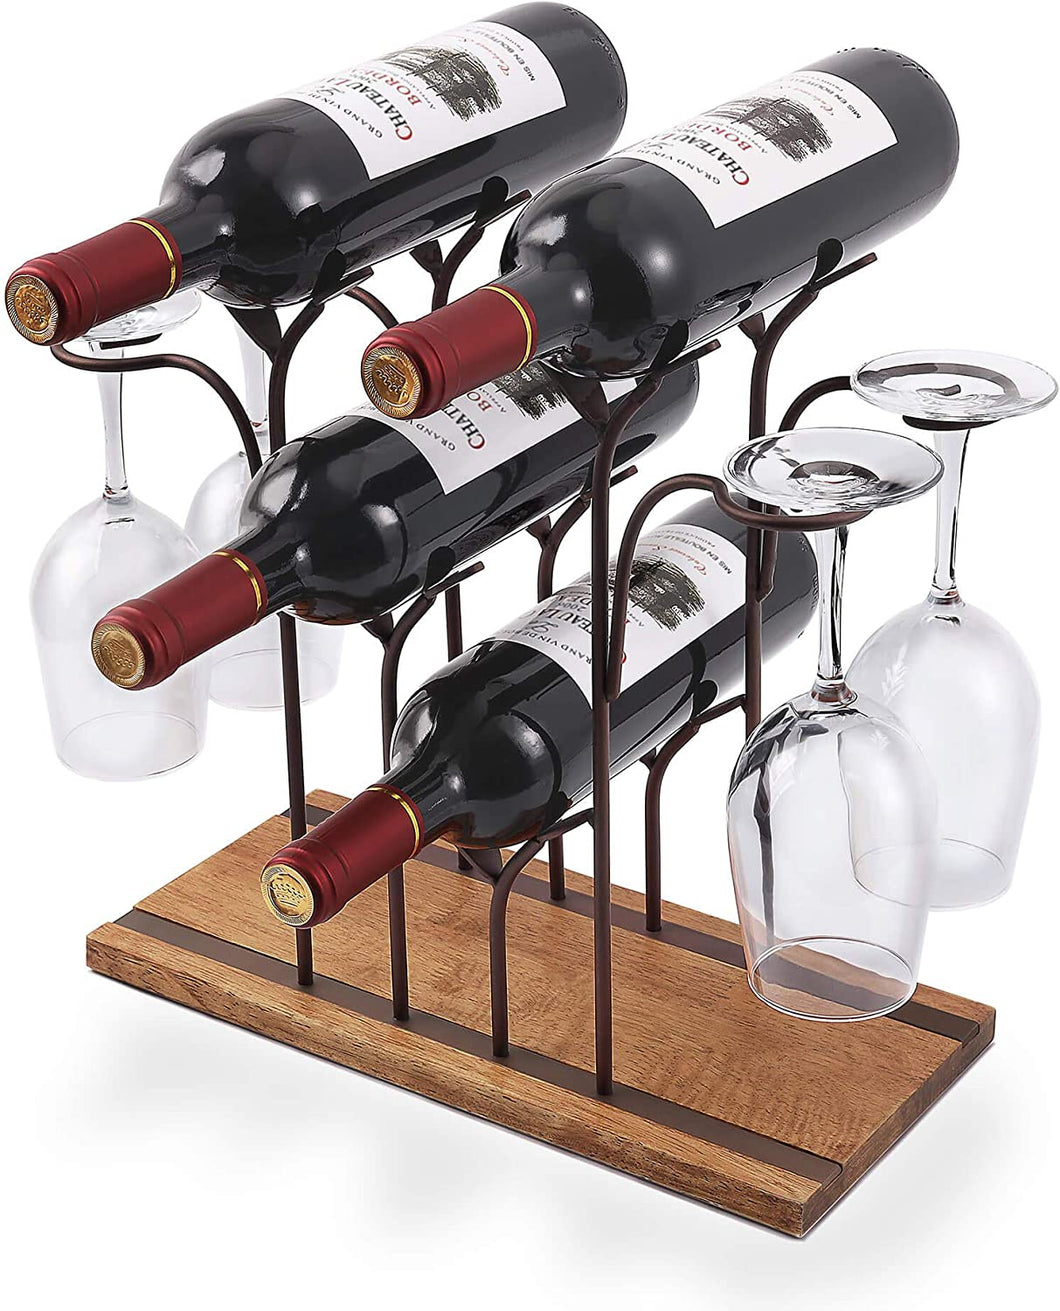 Tabletop Wood Wine Holder, Countertop Wine Rack, Hold 4 Wine Bottles and 4 Glasses, Perfect for Home Decor & Kitchen Storage Rack, Bar, Wine Cellar, Cabinet, Pantry, etc, Wood & Metal (Bronze)